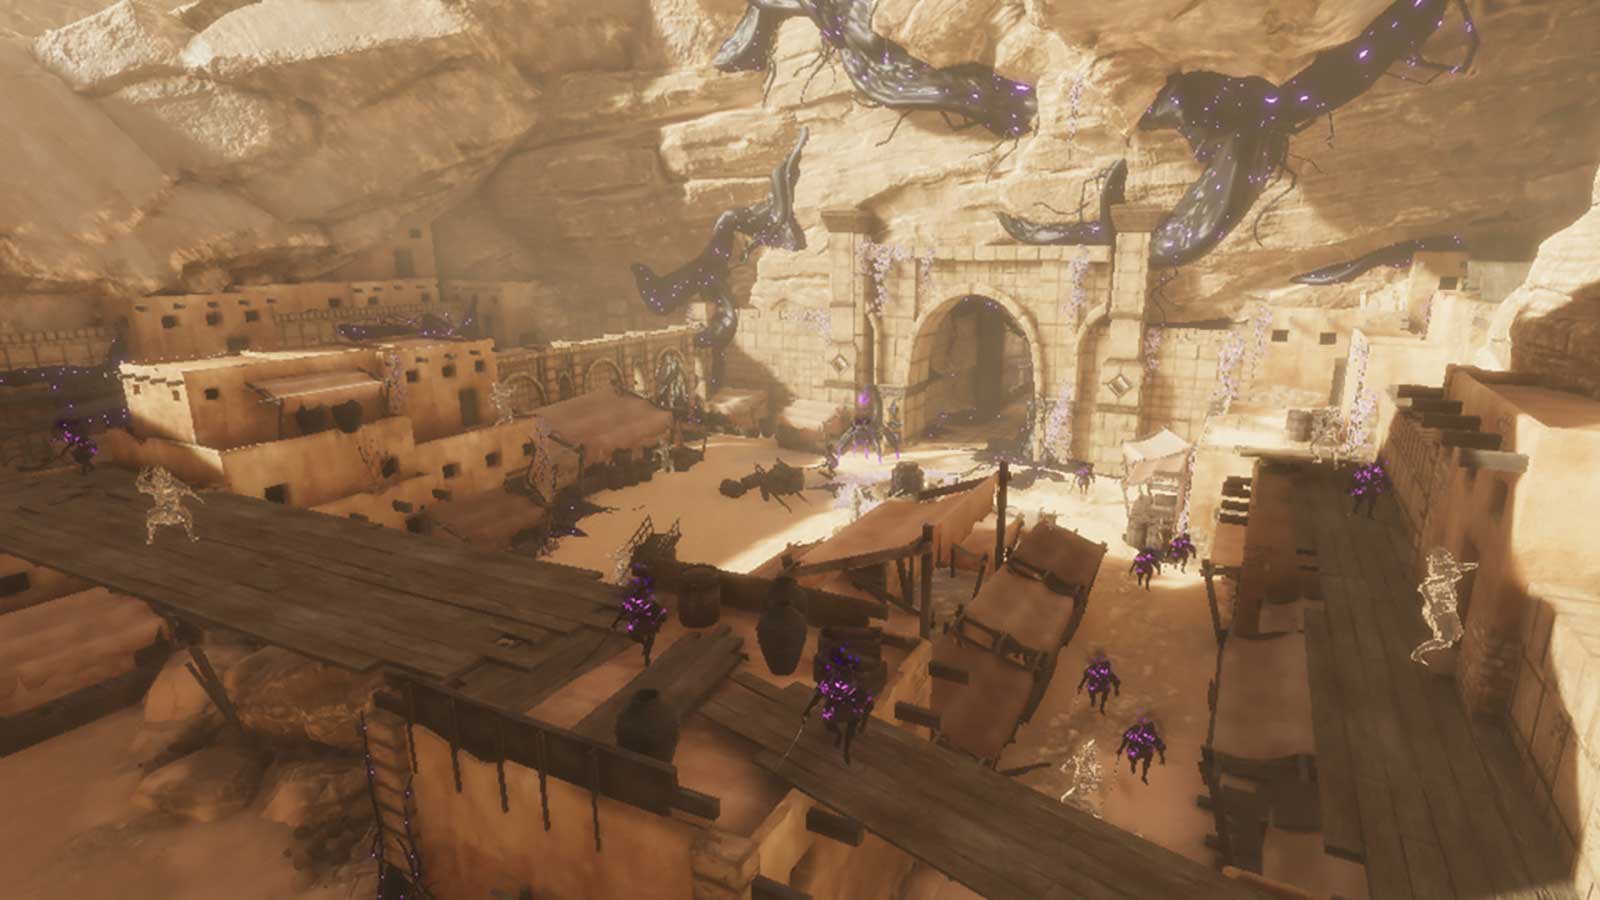 Overhead view of a desert marketplace filled with enemies